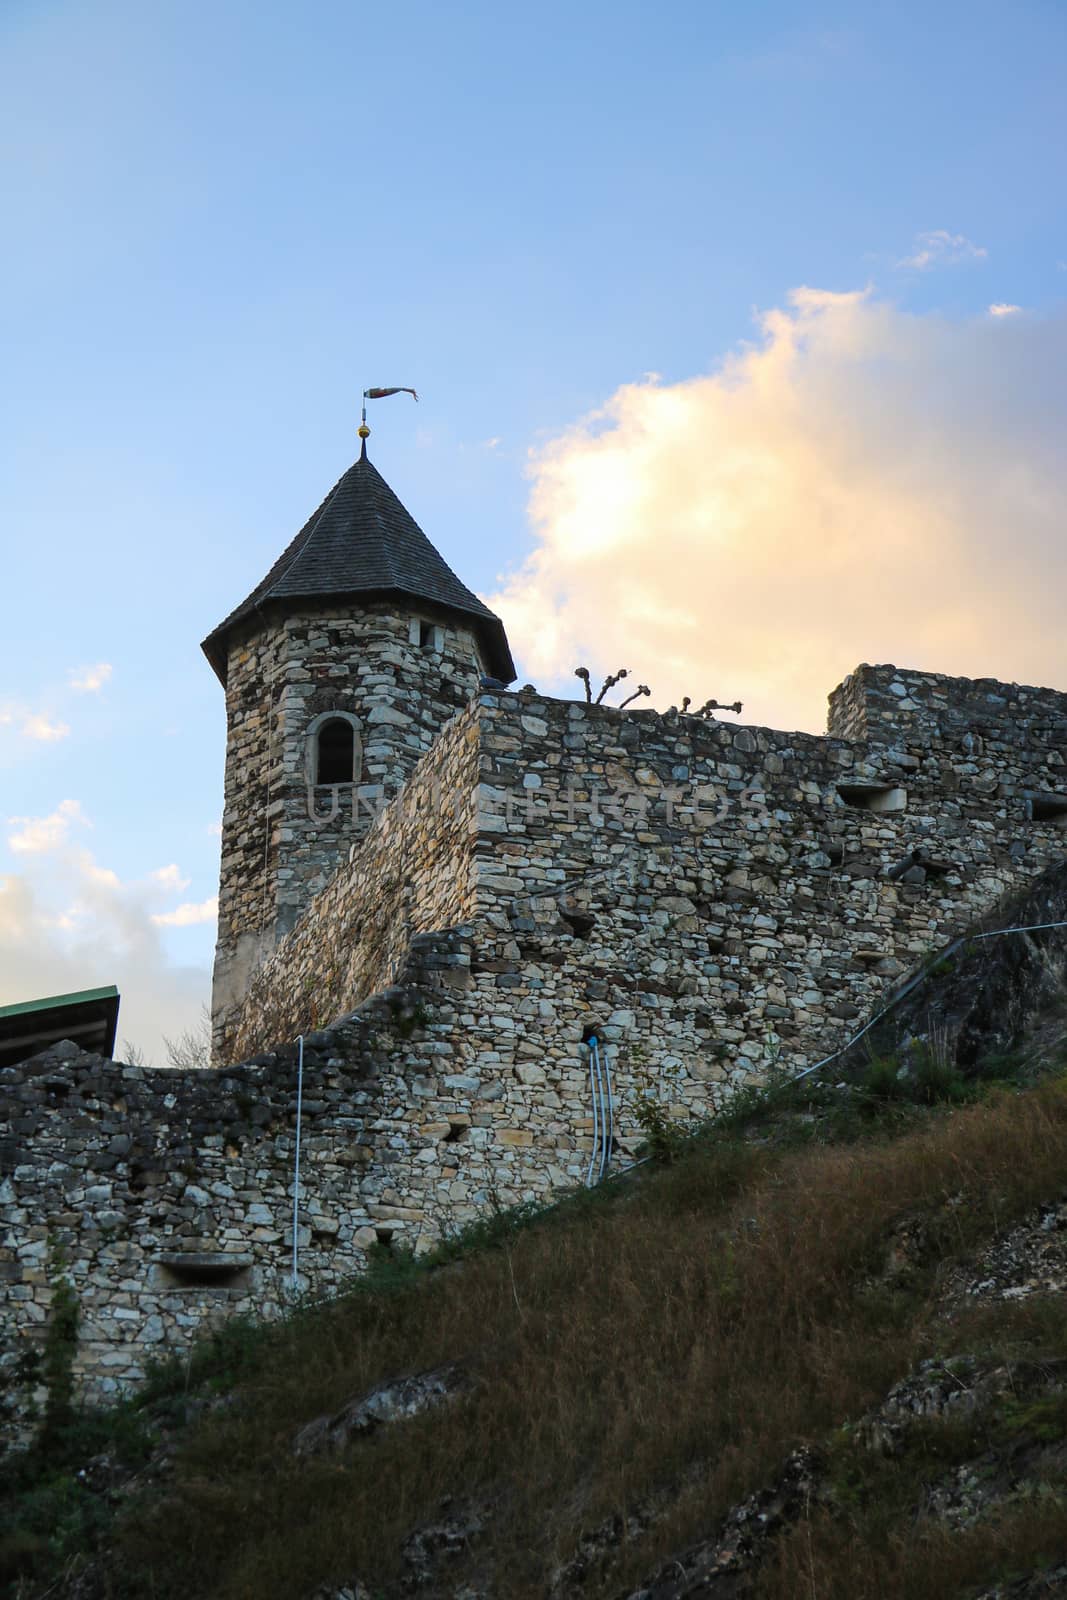 Fragment of an old castle with a stone wall